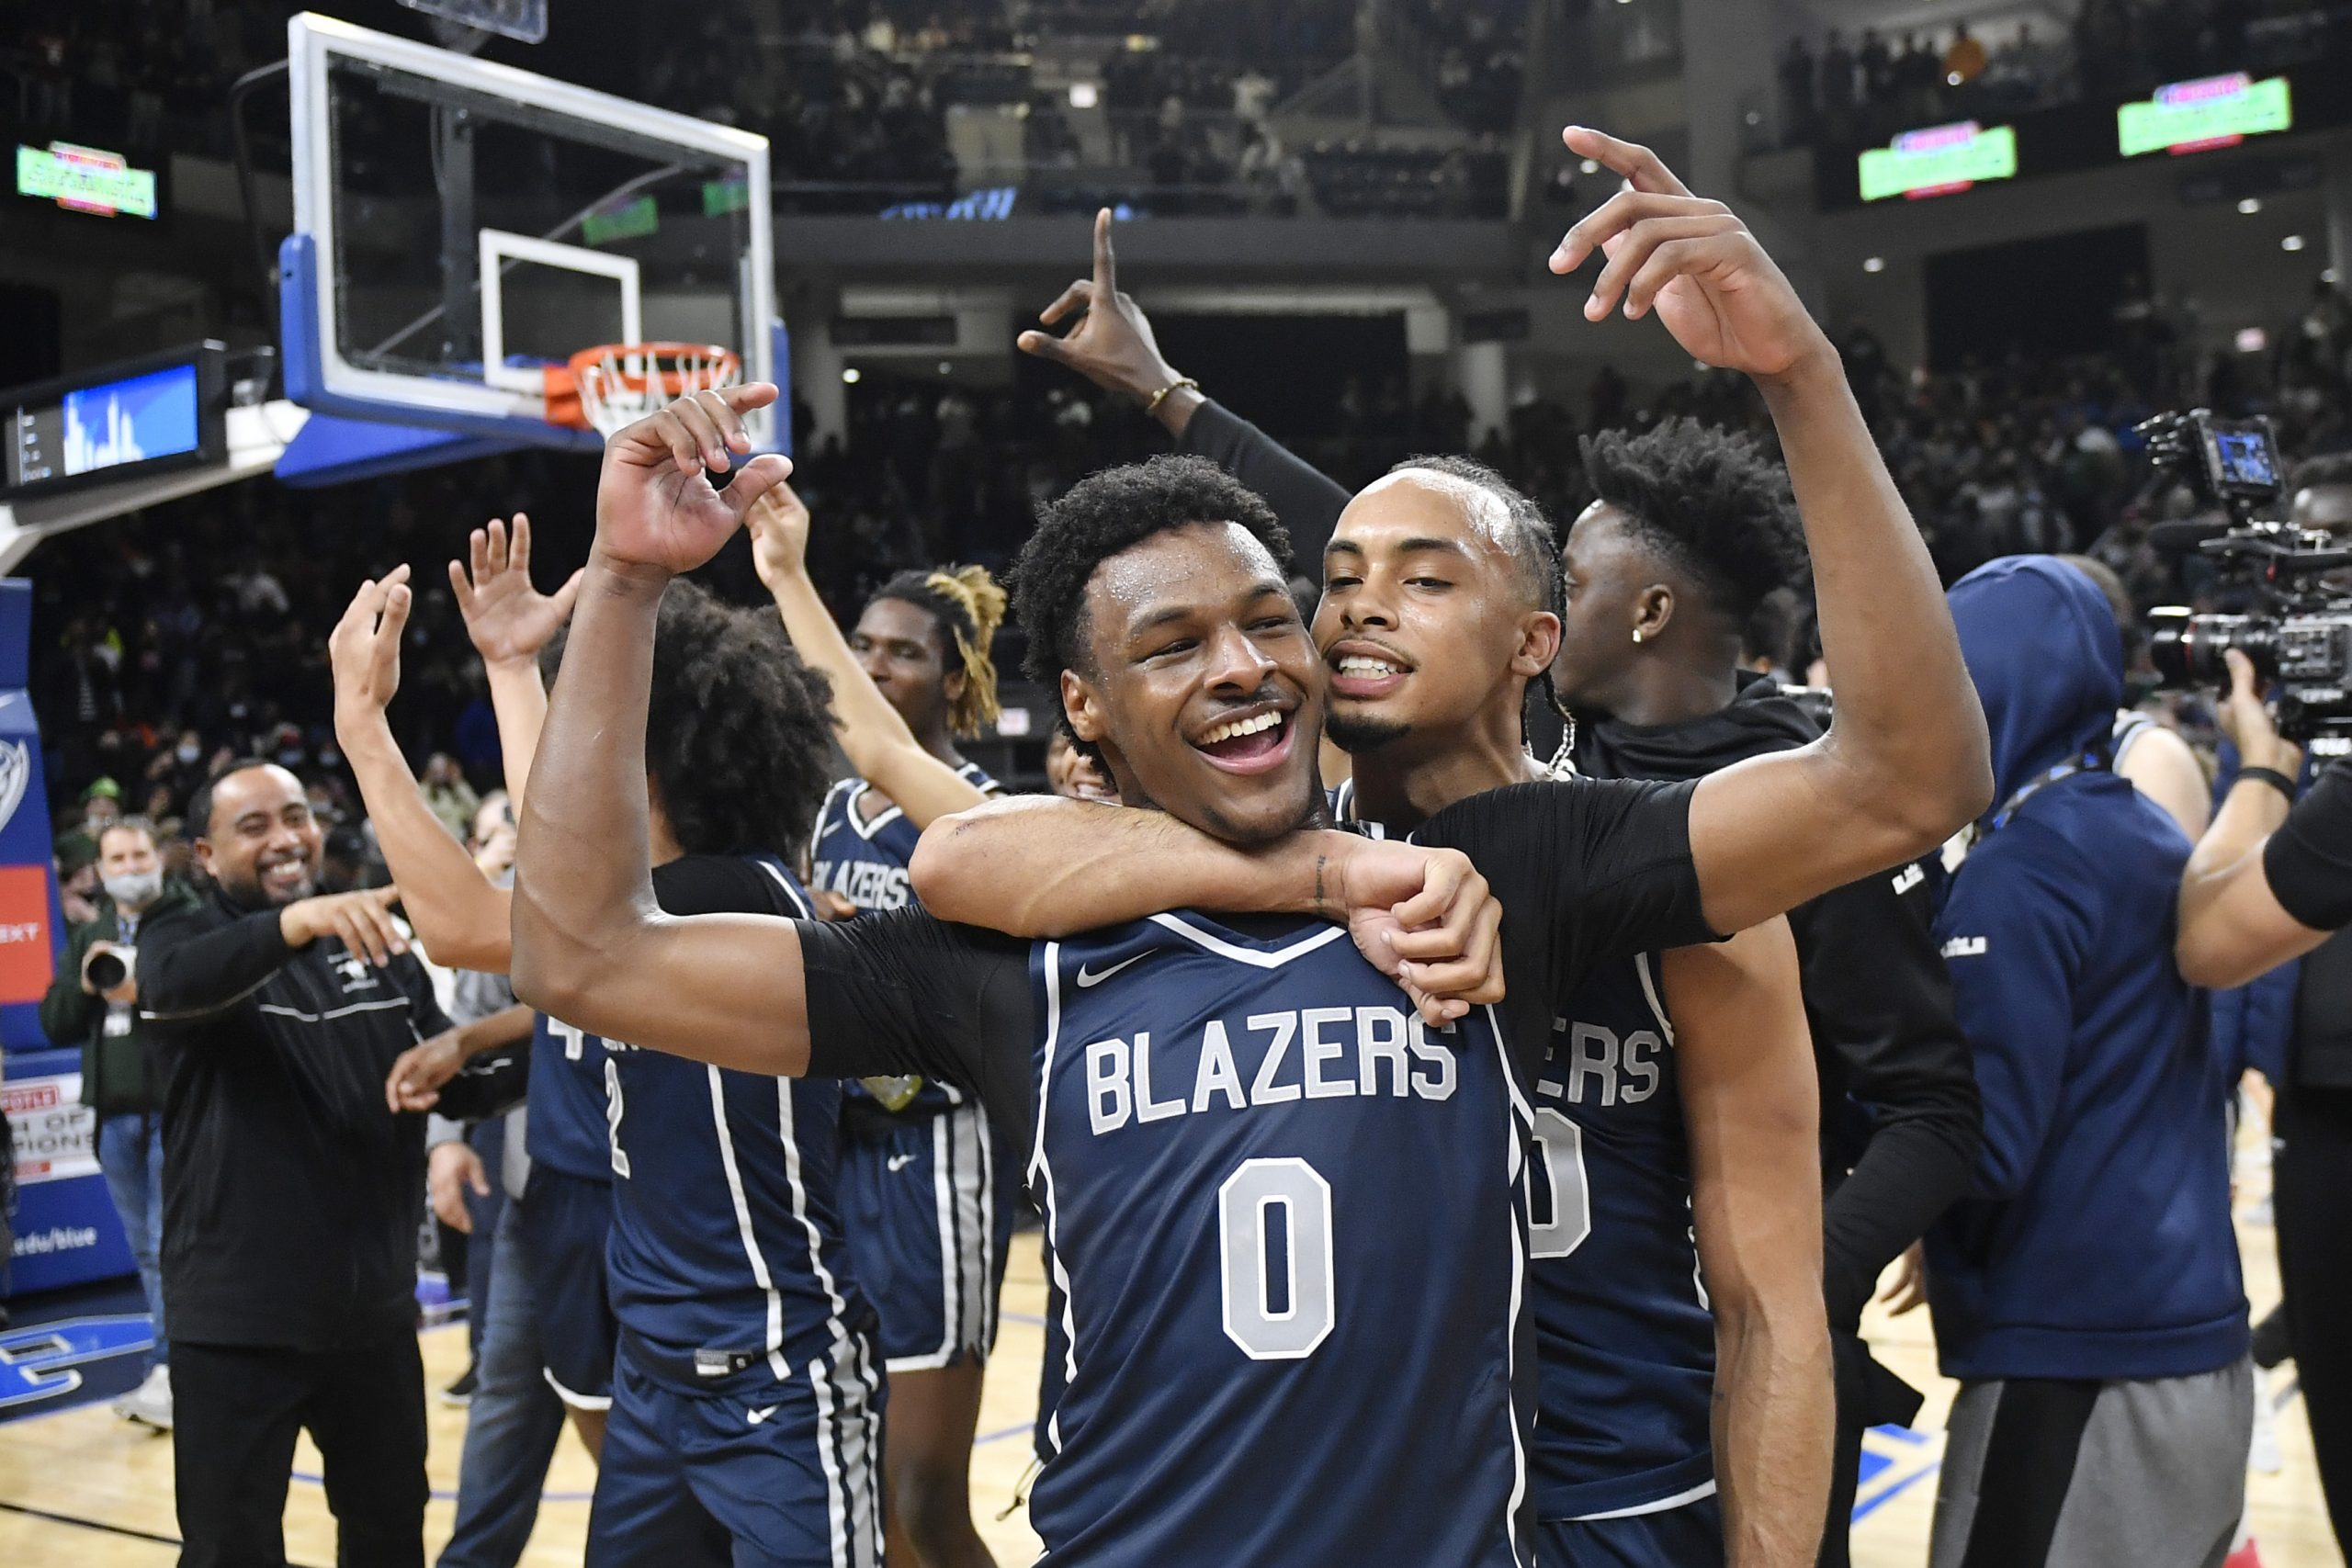 Bronny James #0 and Amari Bailey #10 of Sierra Canyon HS celebrate after defeating Glenbard West HS at Wintrust Arena on February 05, 2022. in Chicago, Illinois.